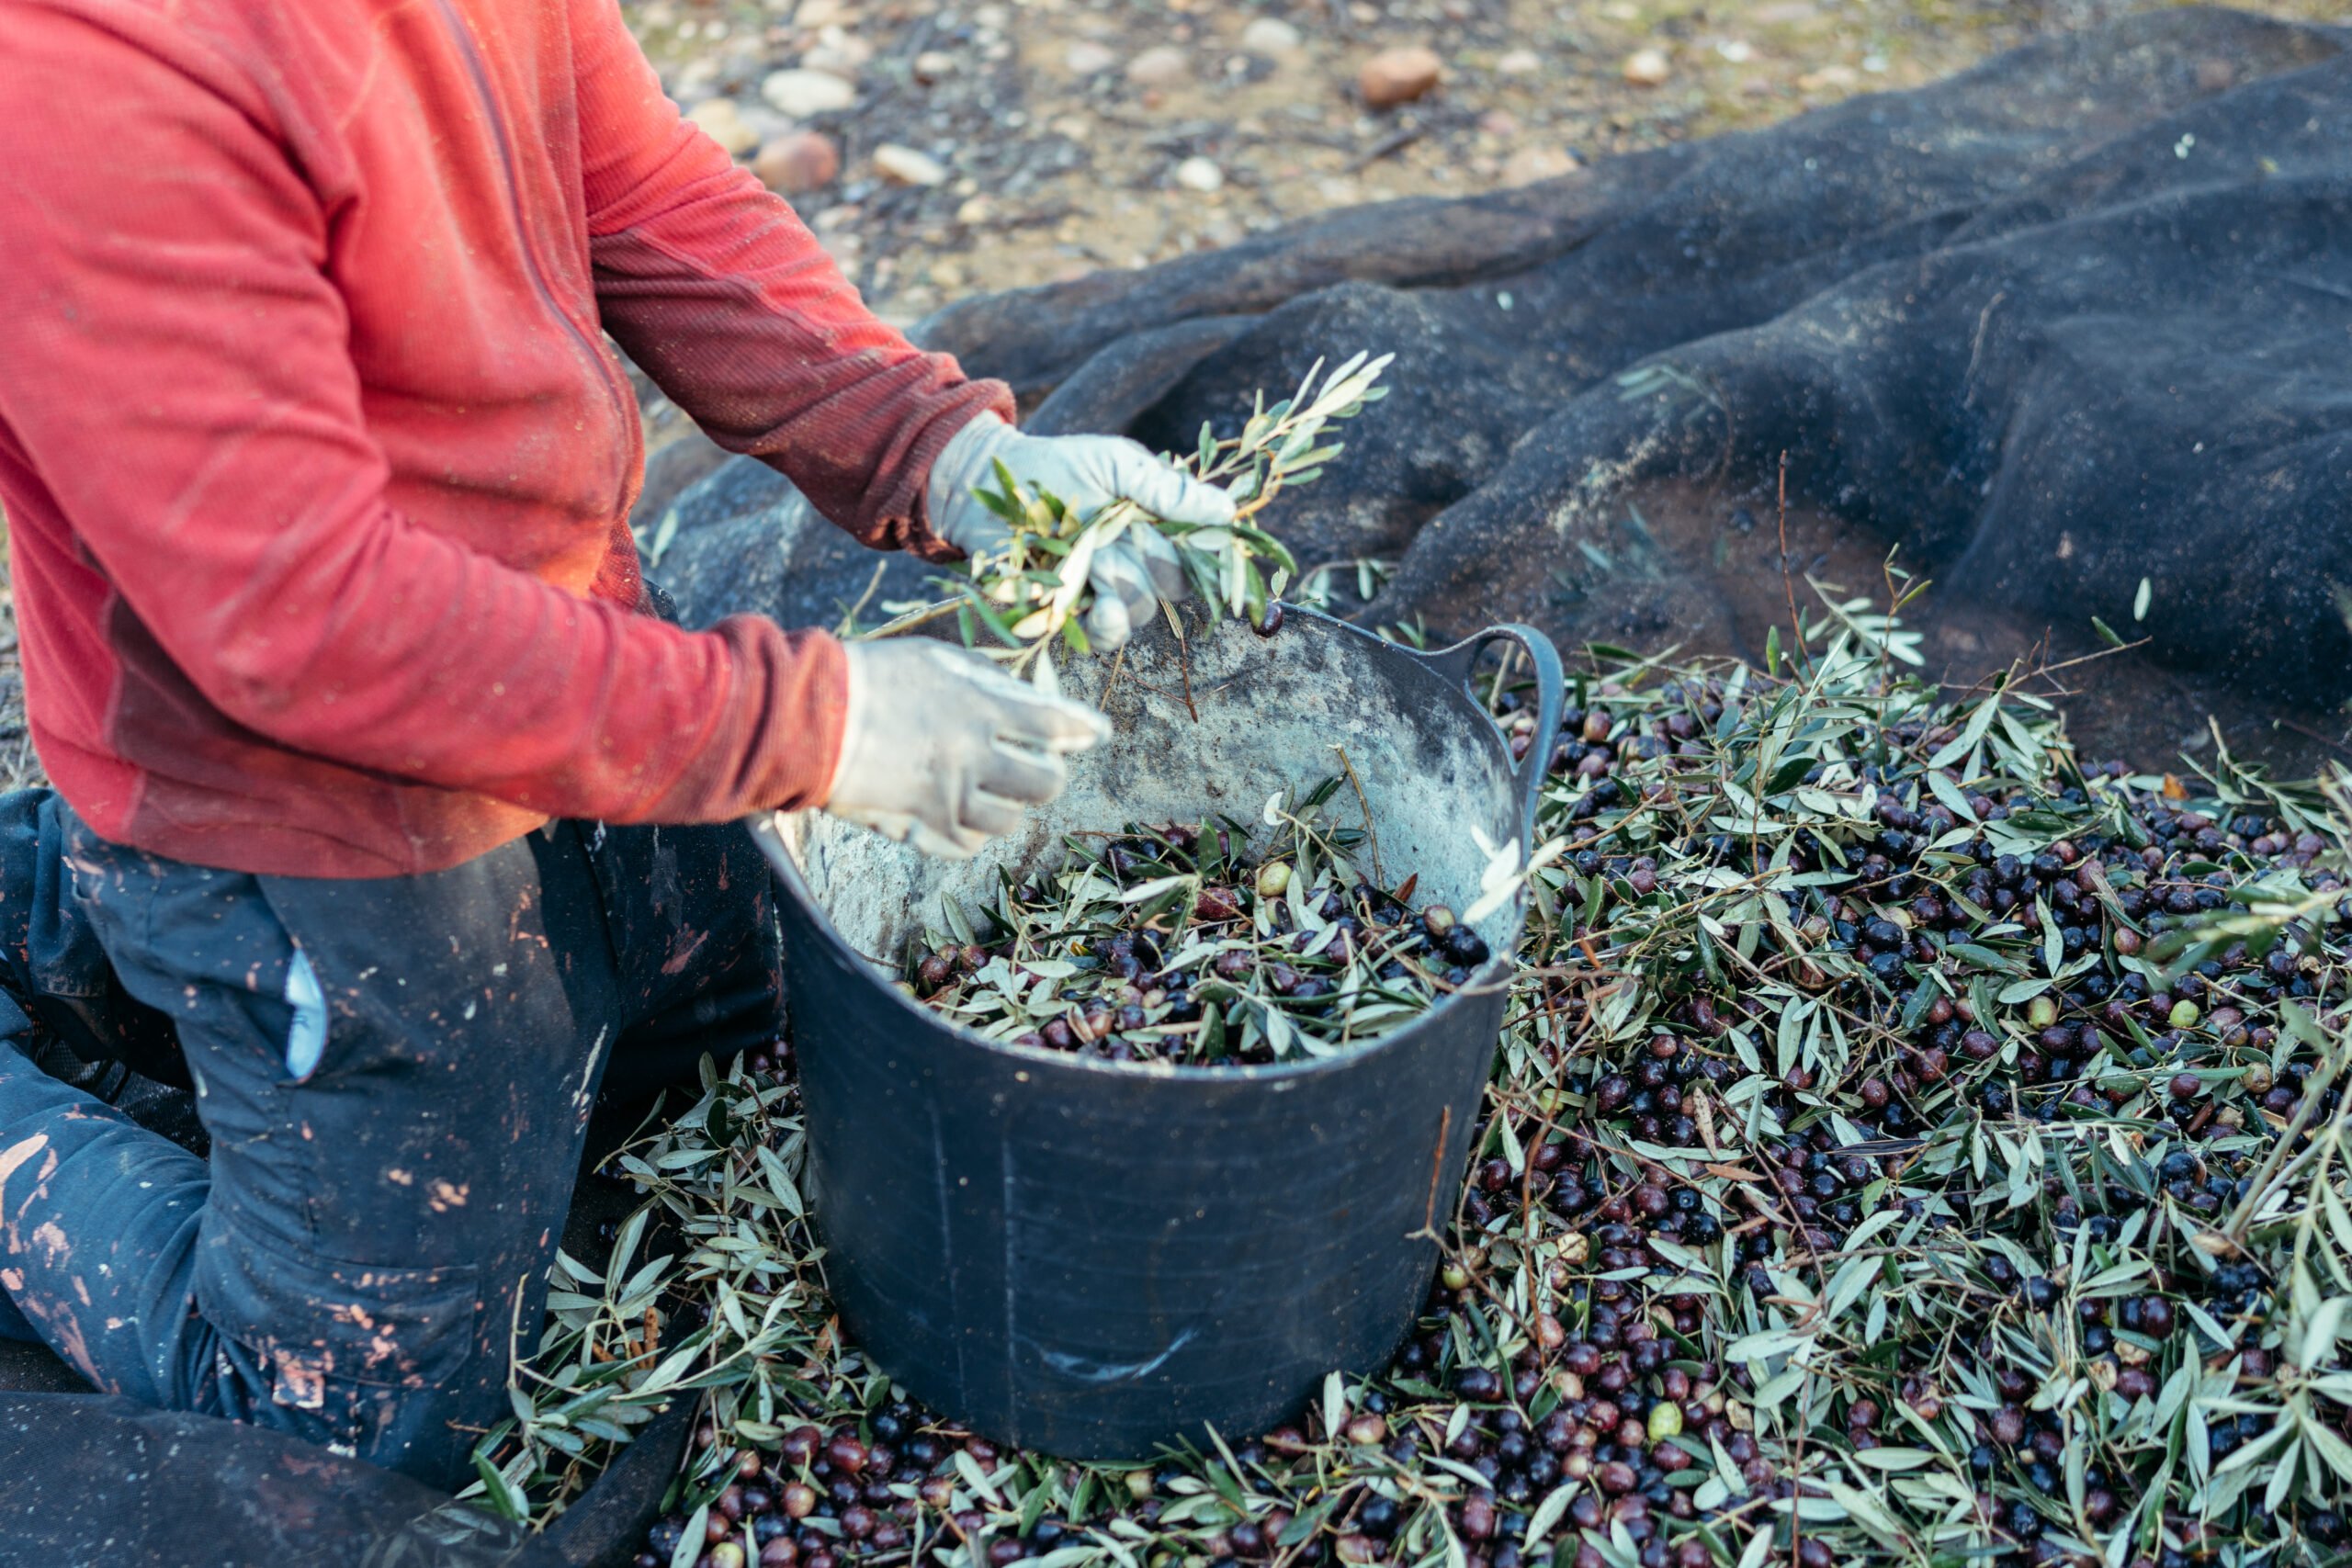 worker on his knees separating the olives from the branches and throwing them into a basket